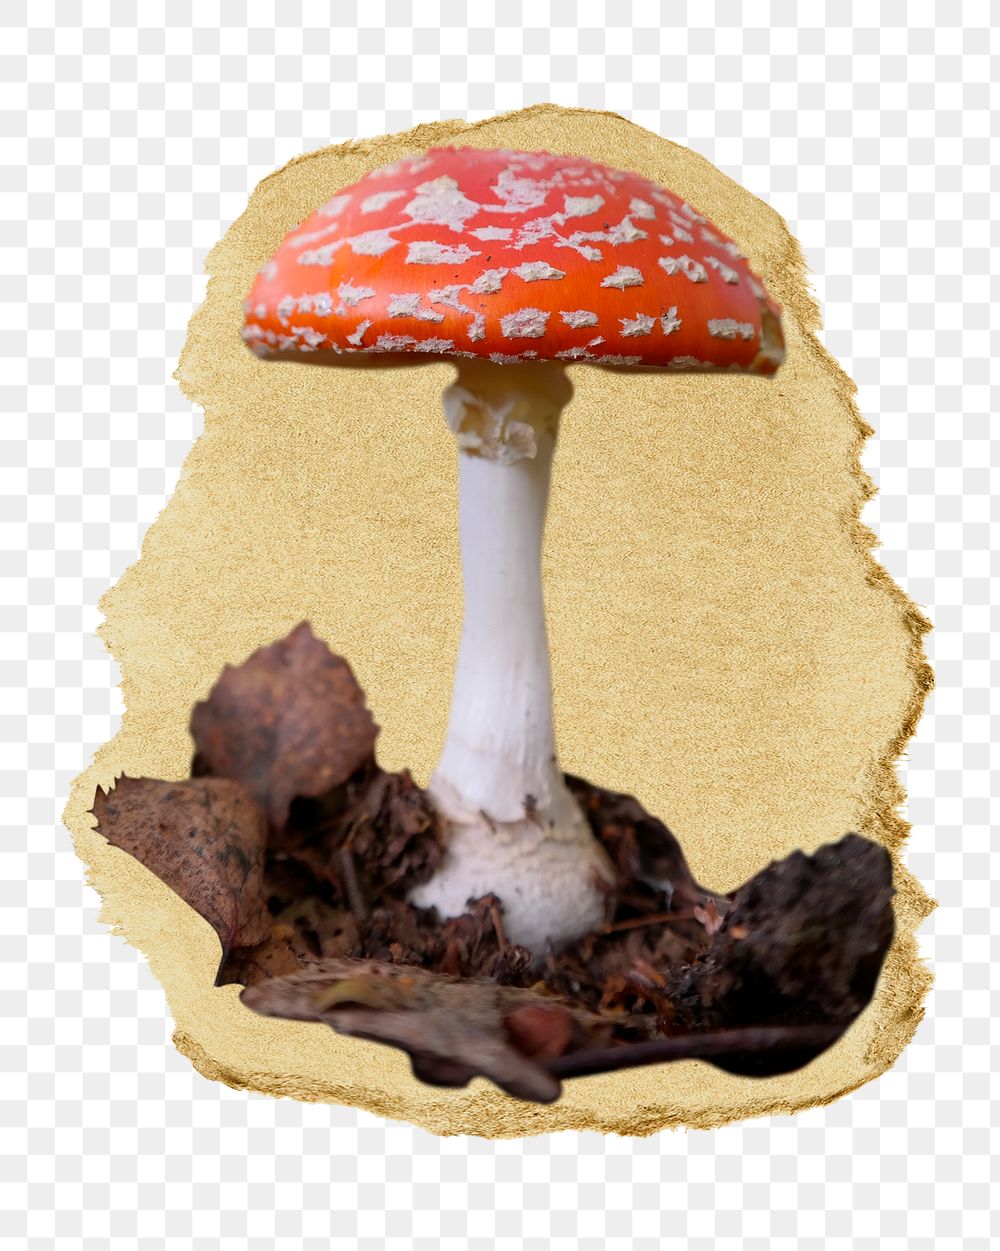 Poisonous mushroom png sticker, ripped paper, transparent background